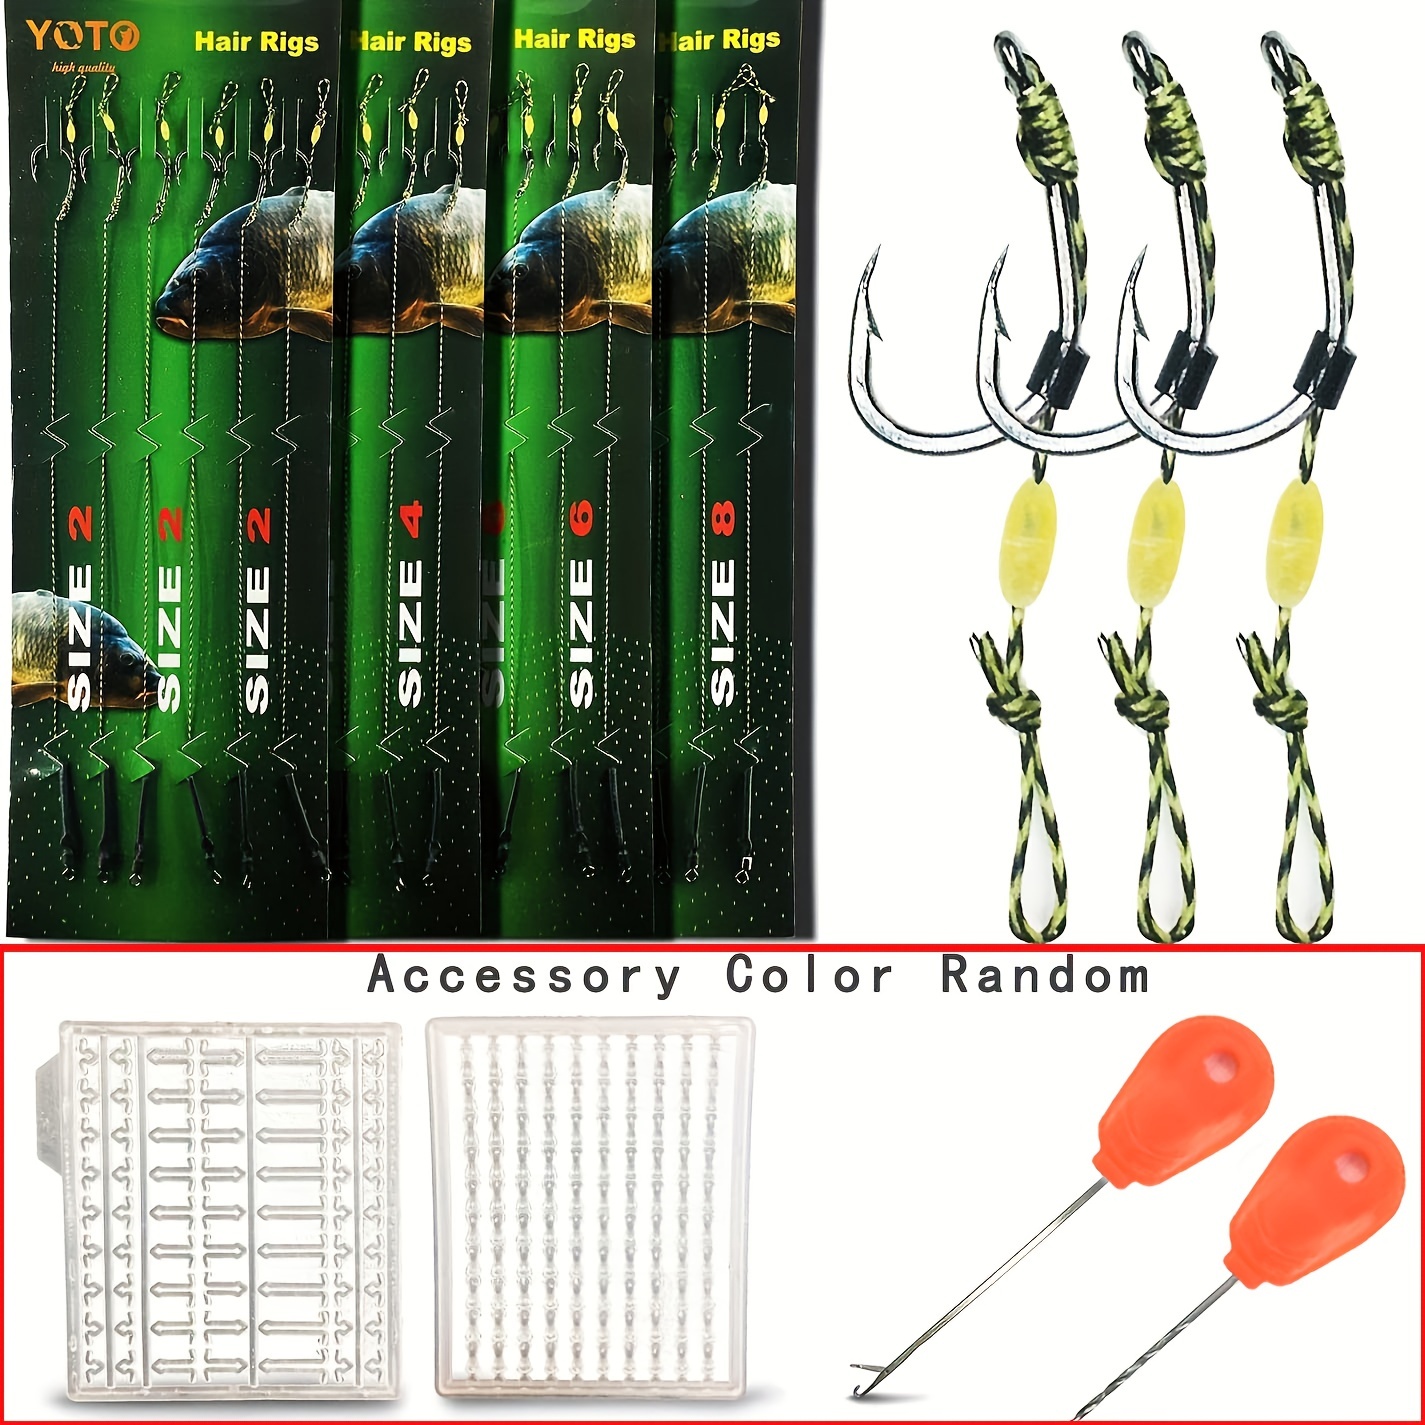 

Yoto Carp Fishing Hair Rigs - 24pcs High Carbon Steel Curved Barbed Carp Hook Swivel Boilies Fishing Rigs With Braided Thread Line Rolling Carp Fishing Accessories